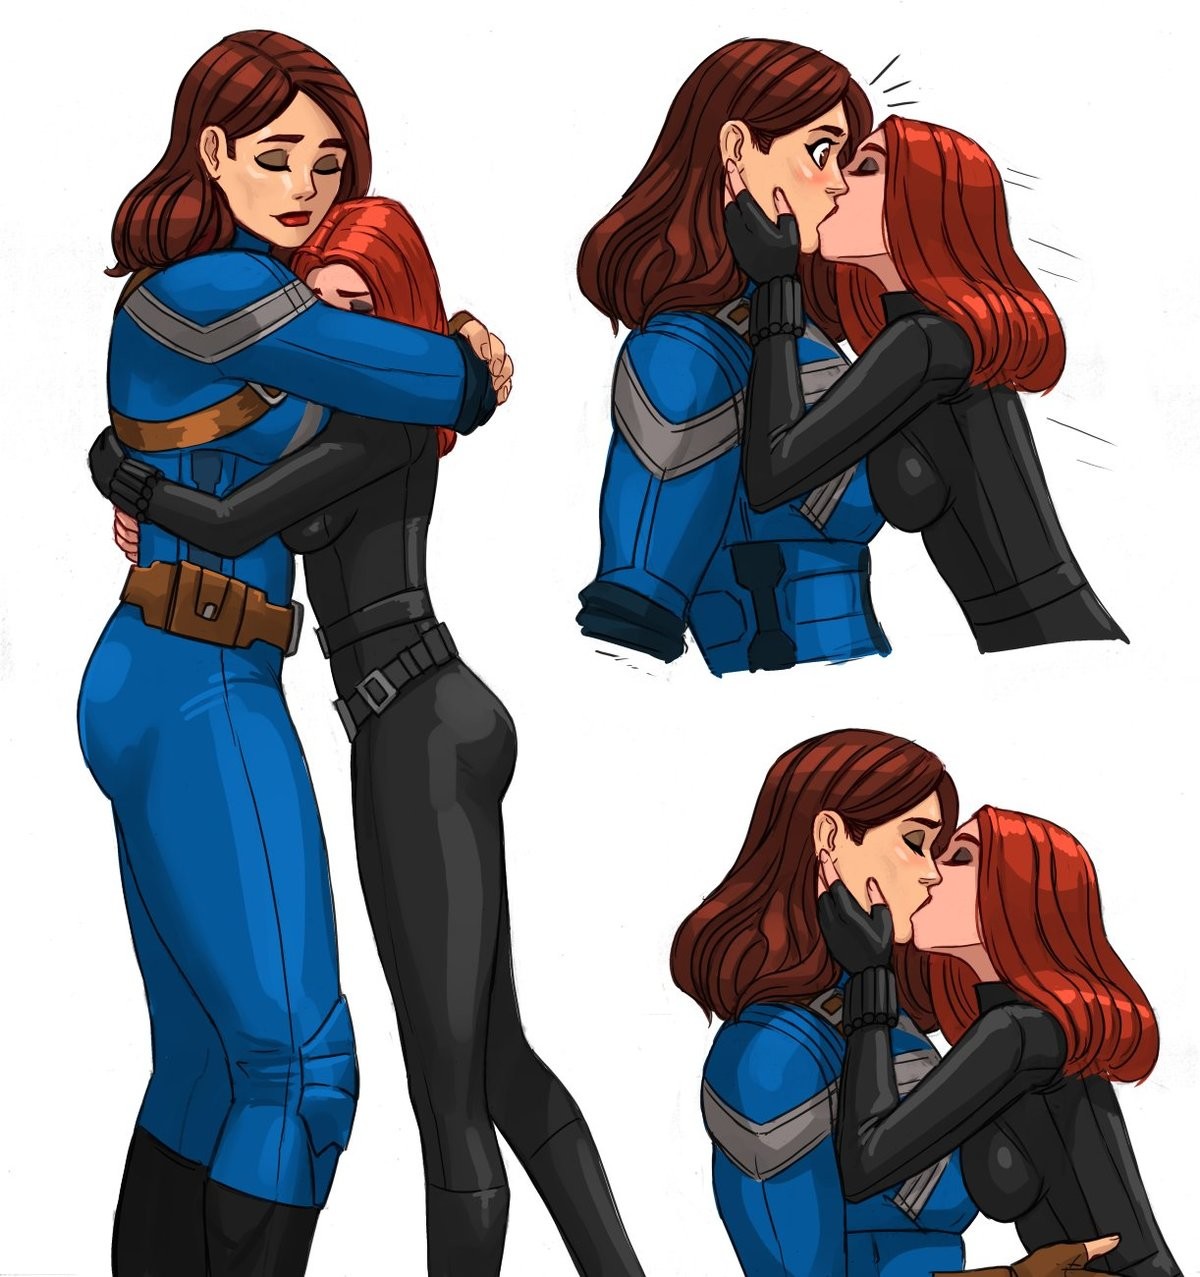 Peggy and Natasha by Flick. .. I for one would like to see more Hot Lesbian representation in TV and movies.